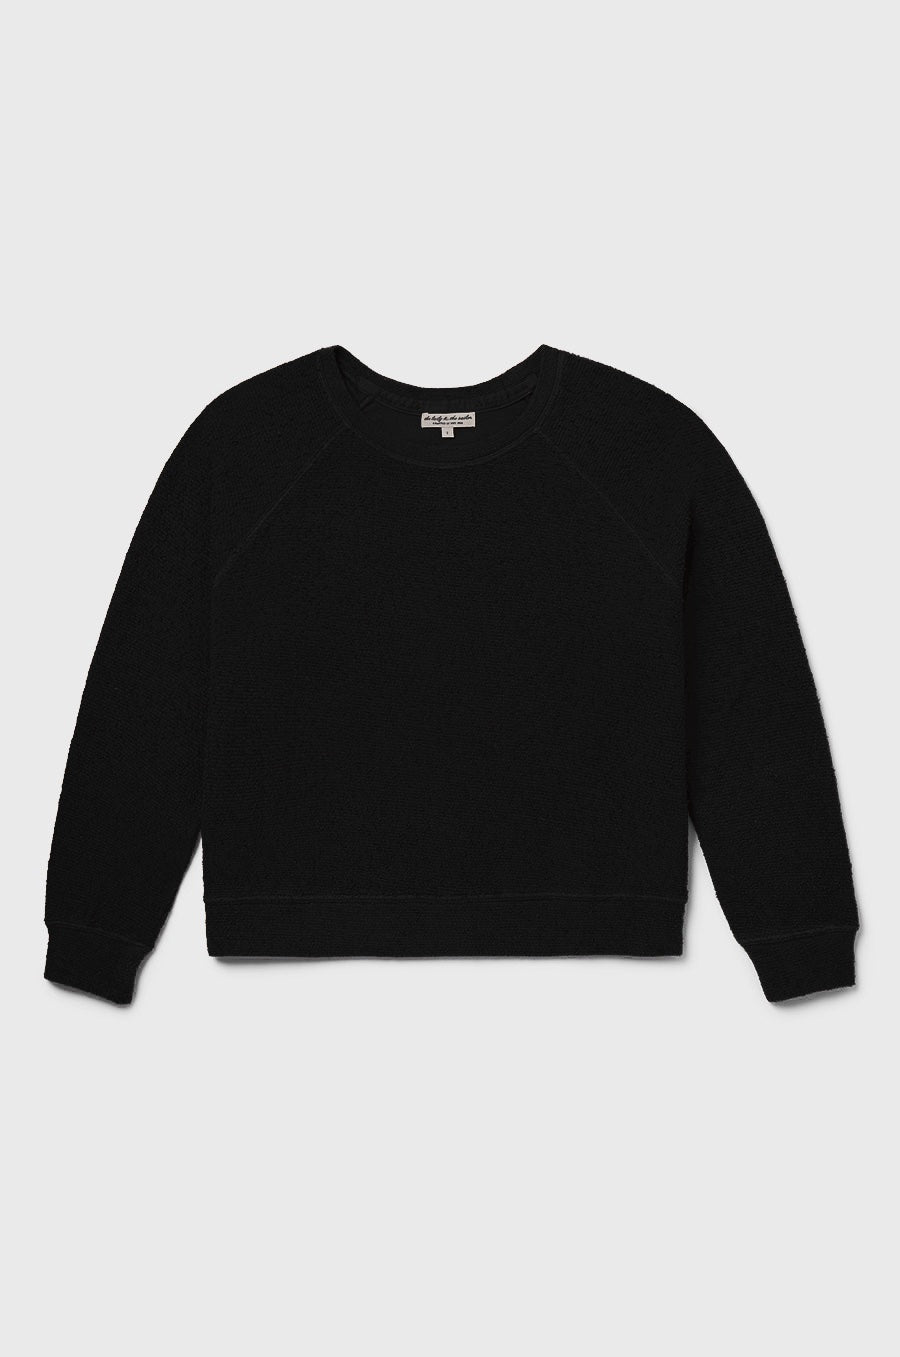 the lady & the sailor Brentwood Sweatshirt in Black Boucle.